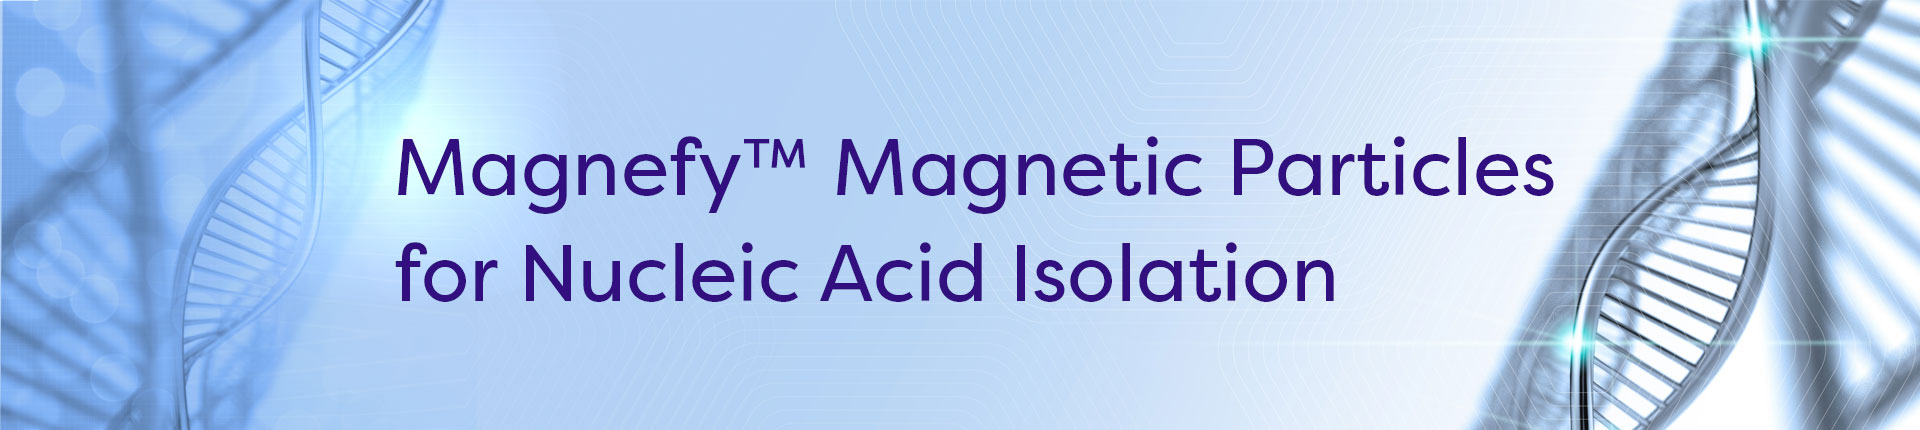 Magnefy Magnetic Particles for Nucleic Acid Isolation